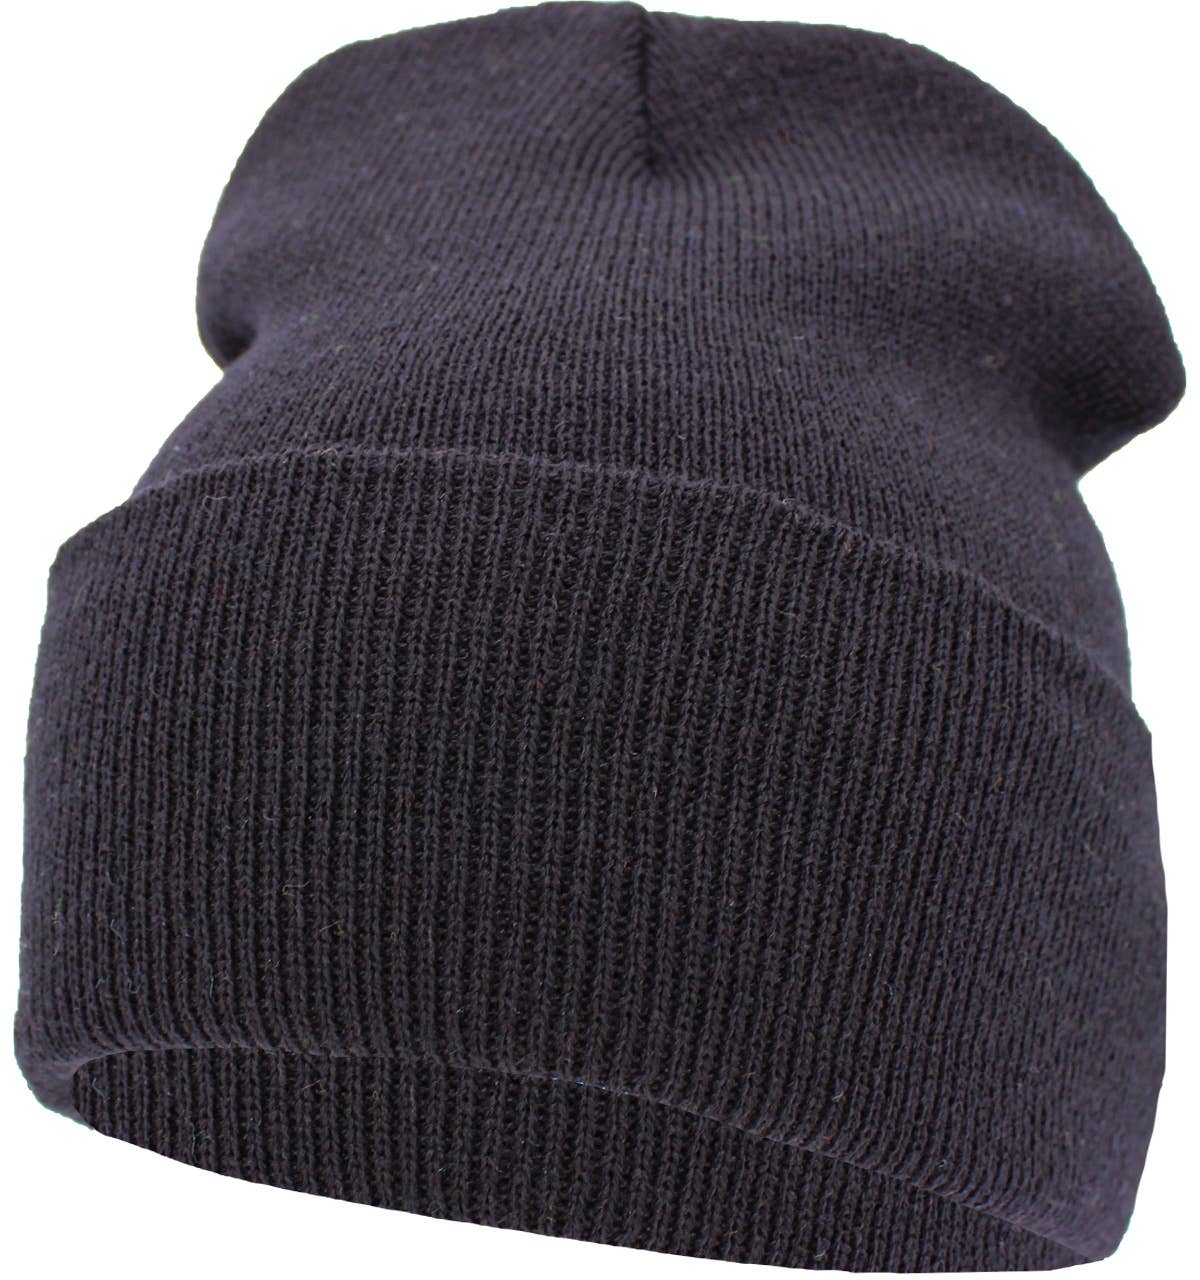 Solid Long Beanie - Made In USA: BLK